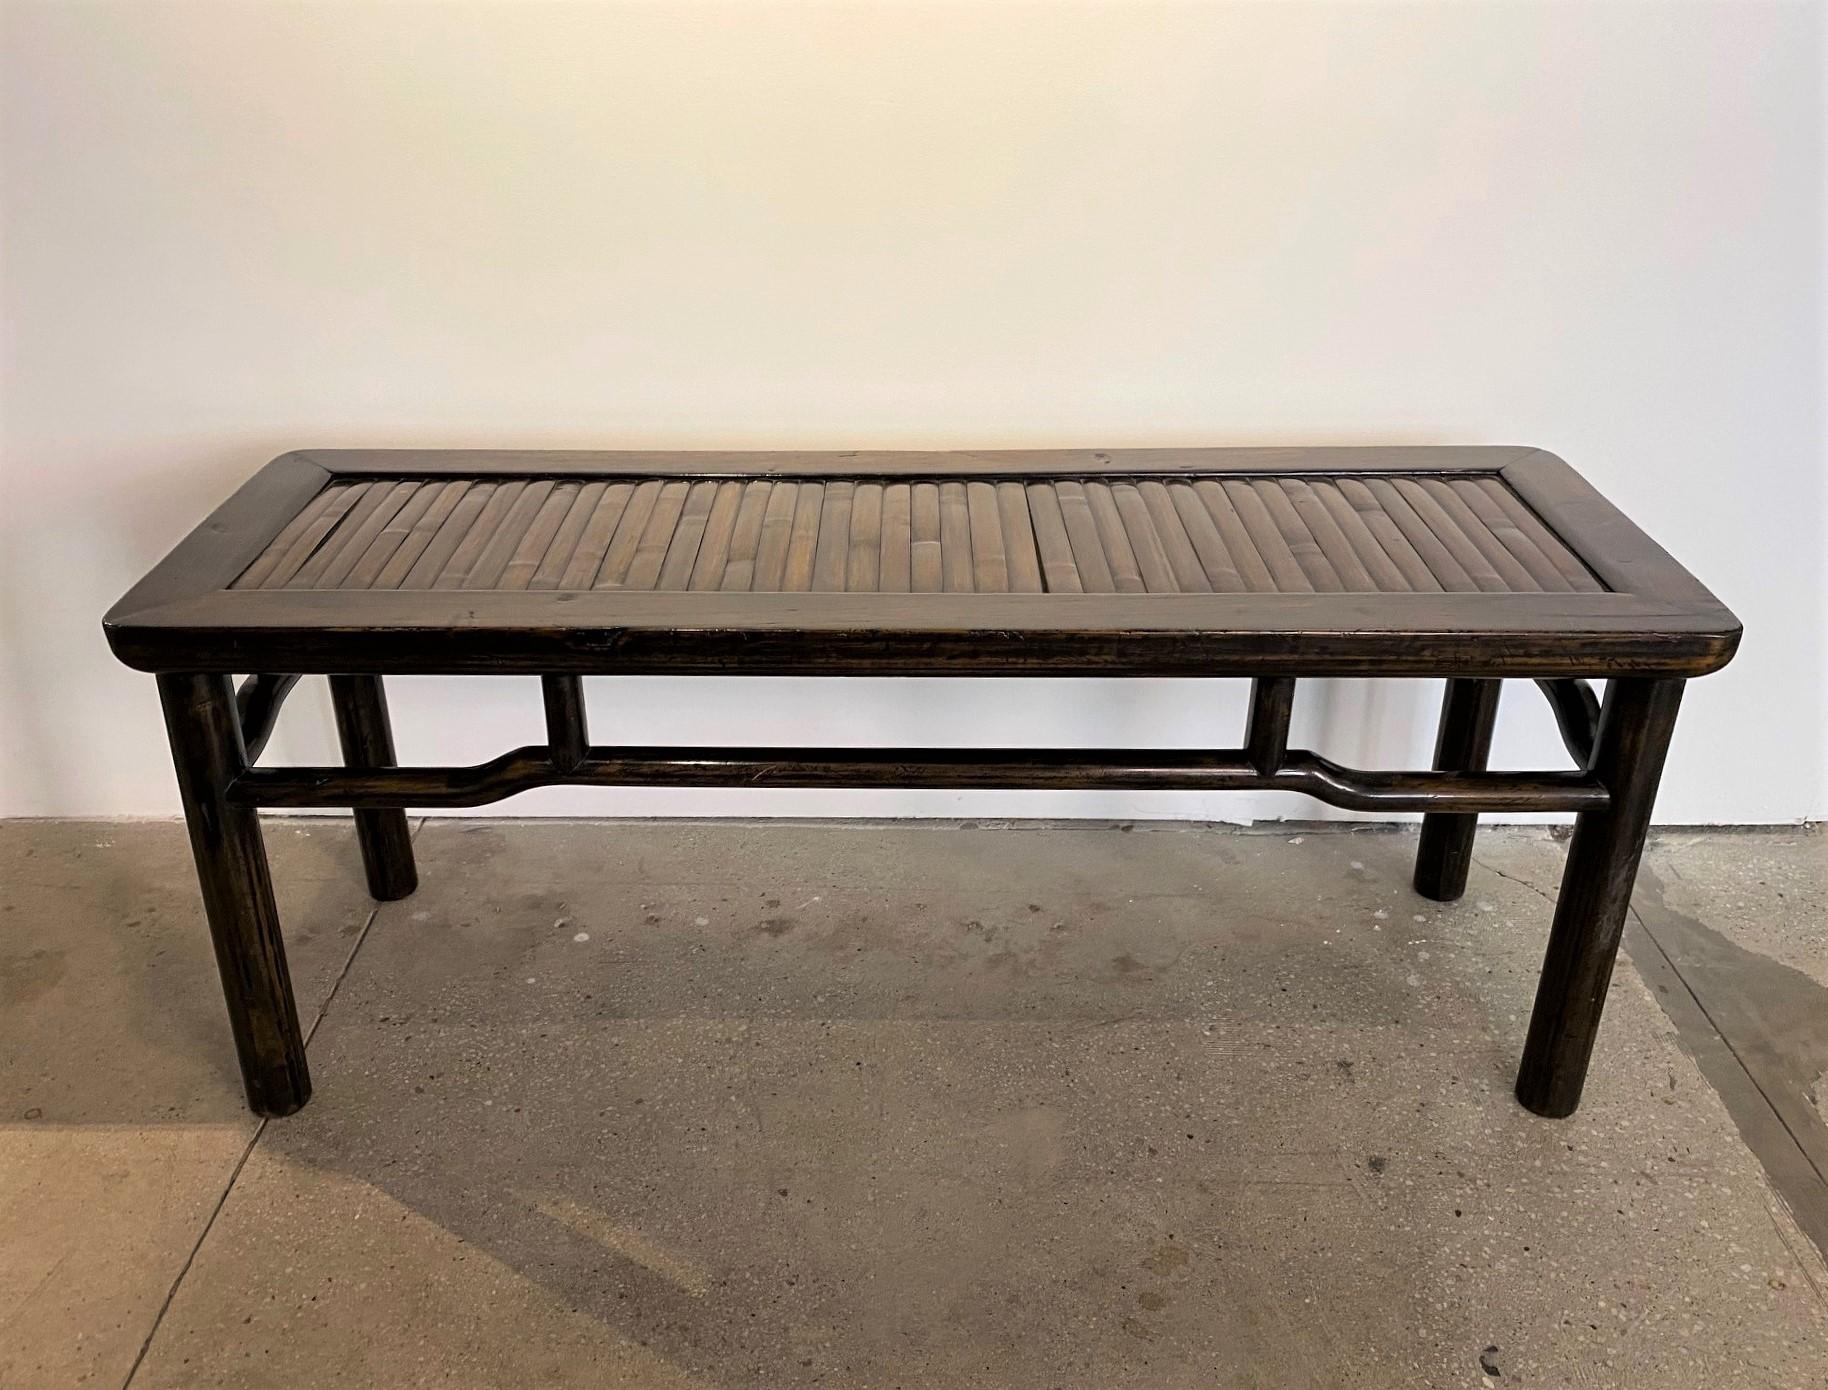 This piece can be used in many different locations. A bench at the end of the bed or your foyer/mudroom. Or its ideal for a narrow coffee table. Either way this handsome 19th Century Chinese Jumu Wood Bench with Bamboo Inset Seat will add character